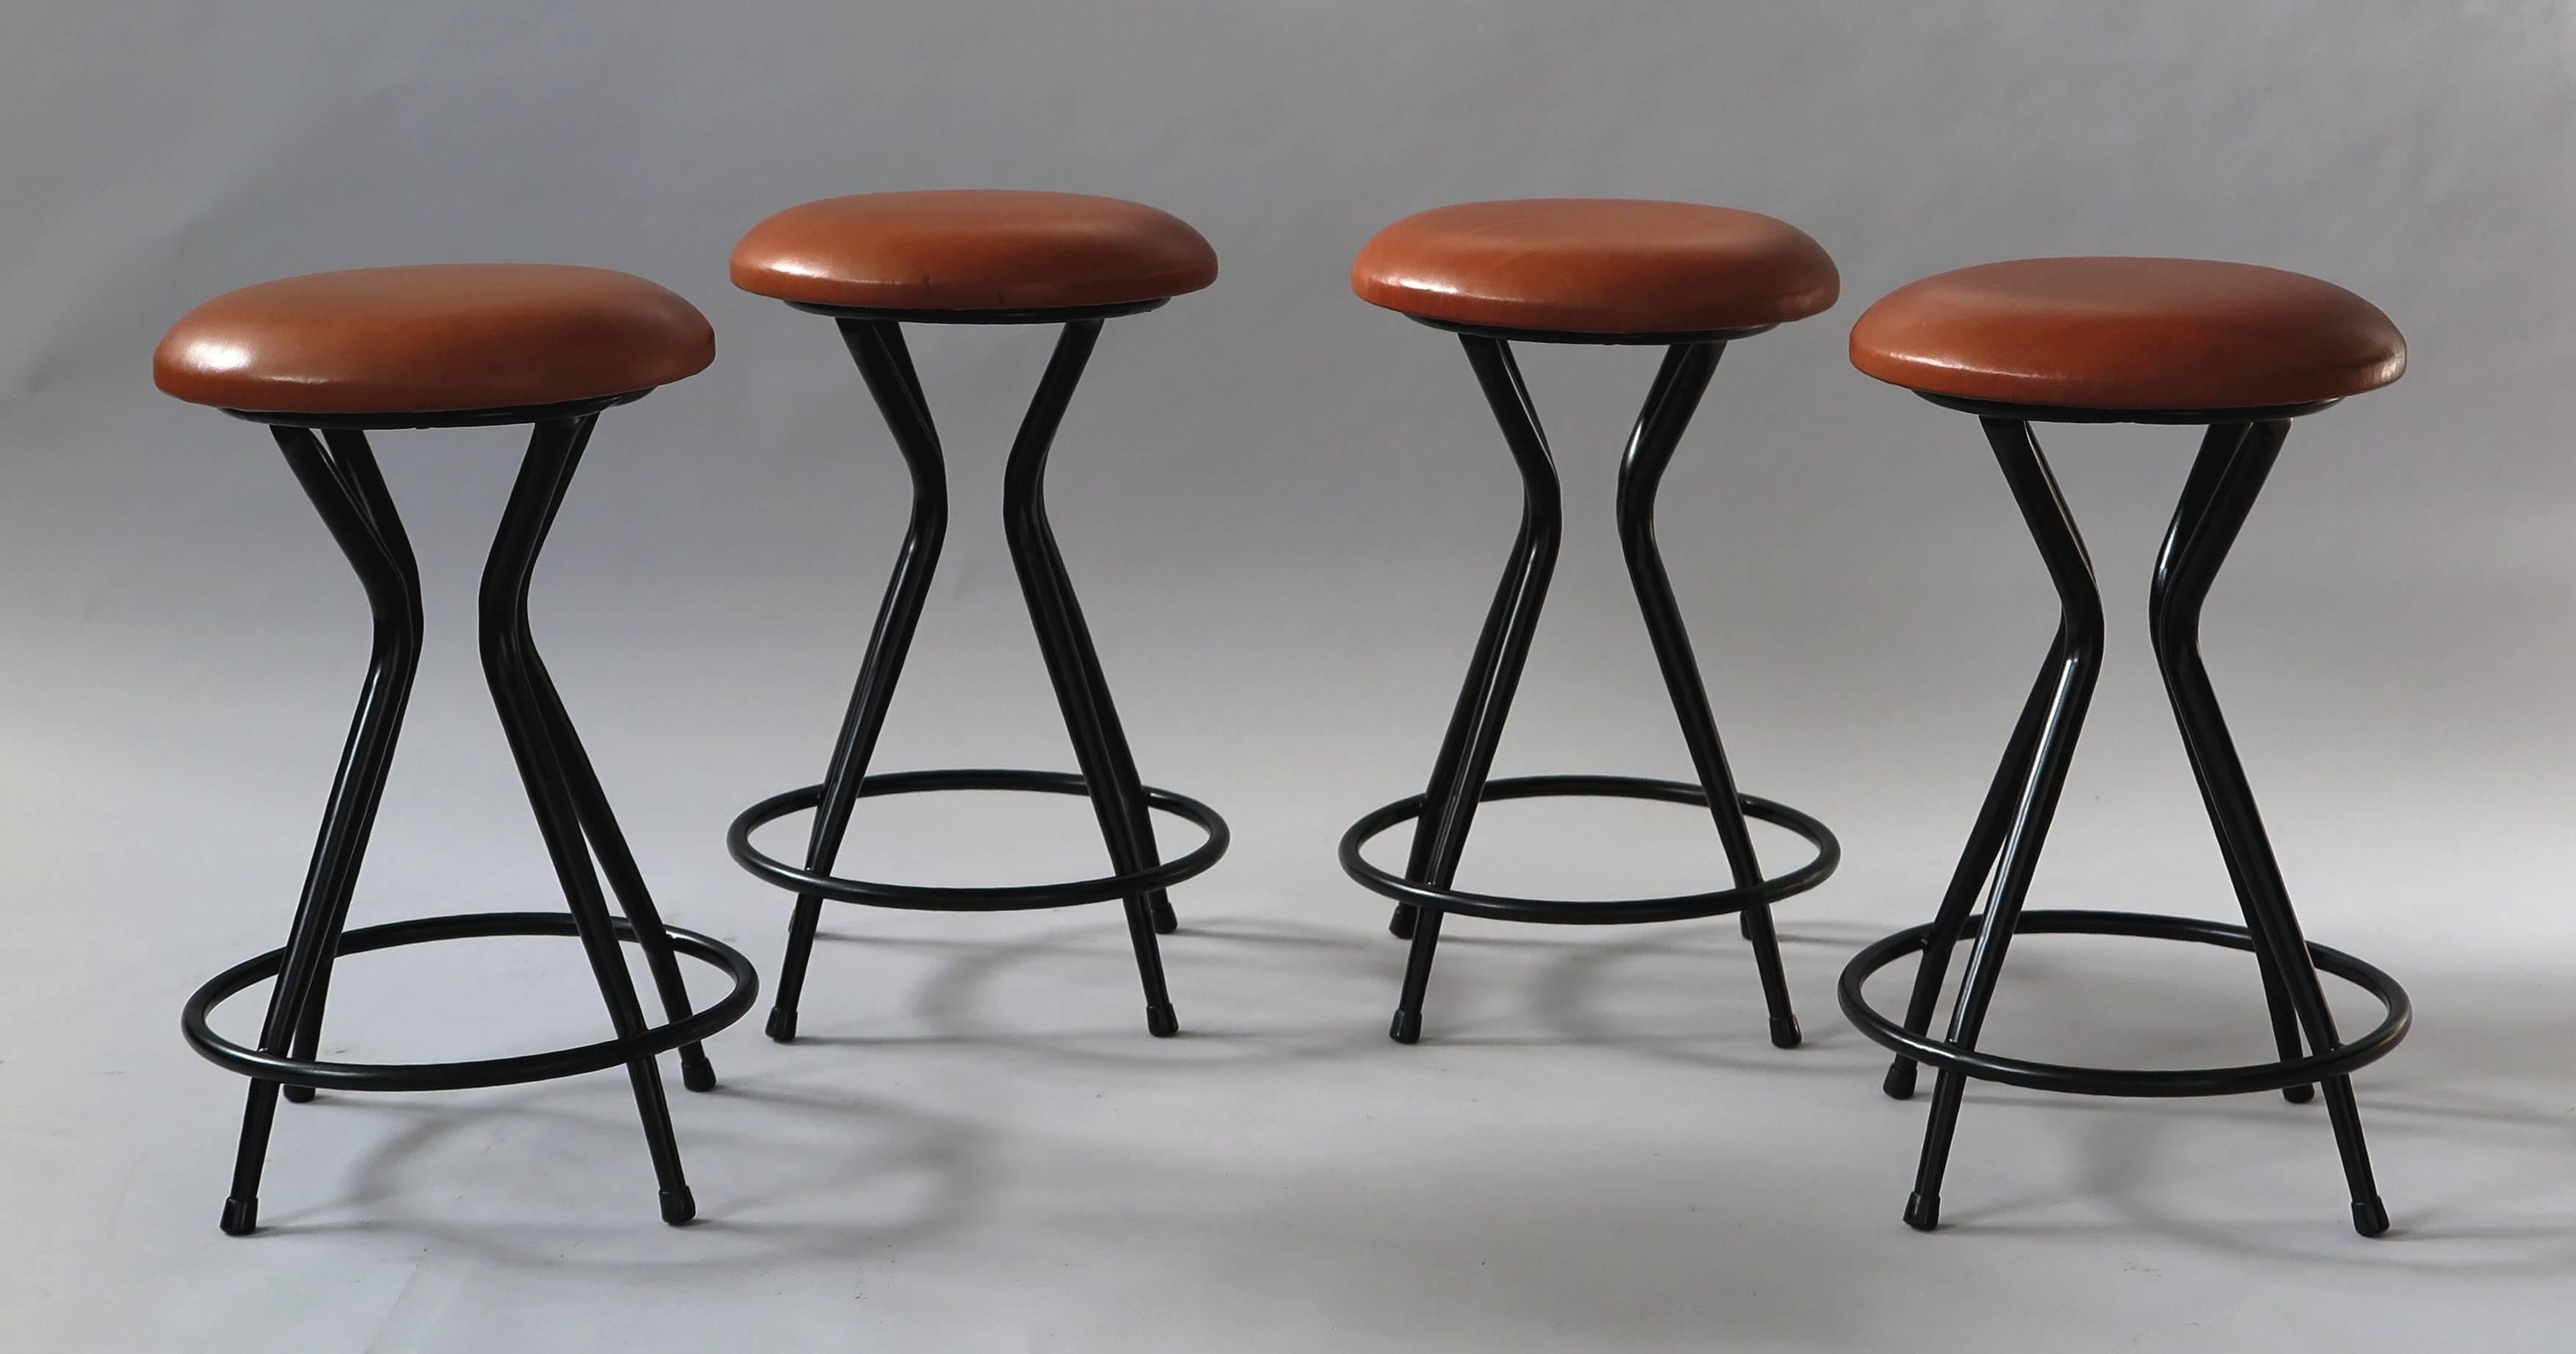 Beautiful shaped metal stools with cognac leather seat, made in Italy 1950s.
Reupholstered, bases with new lacquer.